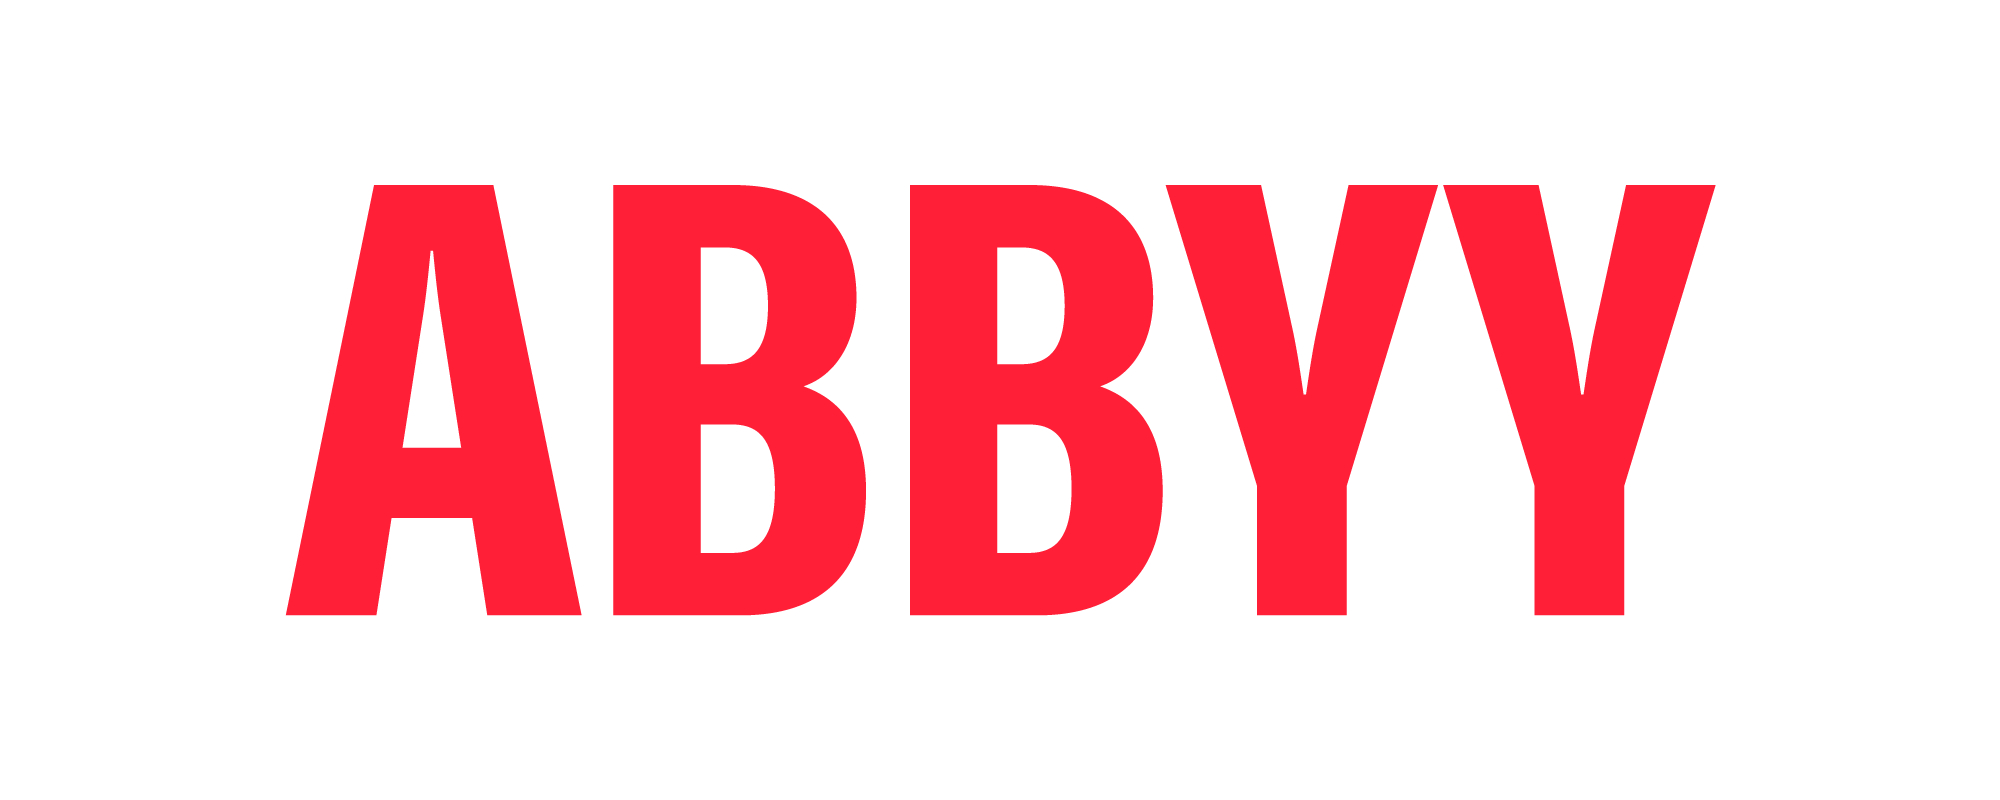 ABBYY Appoints James Ritter to Chief Financial Officer